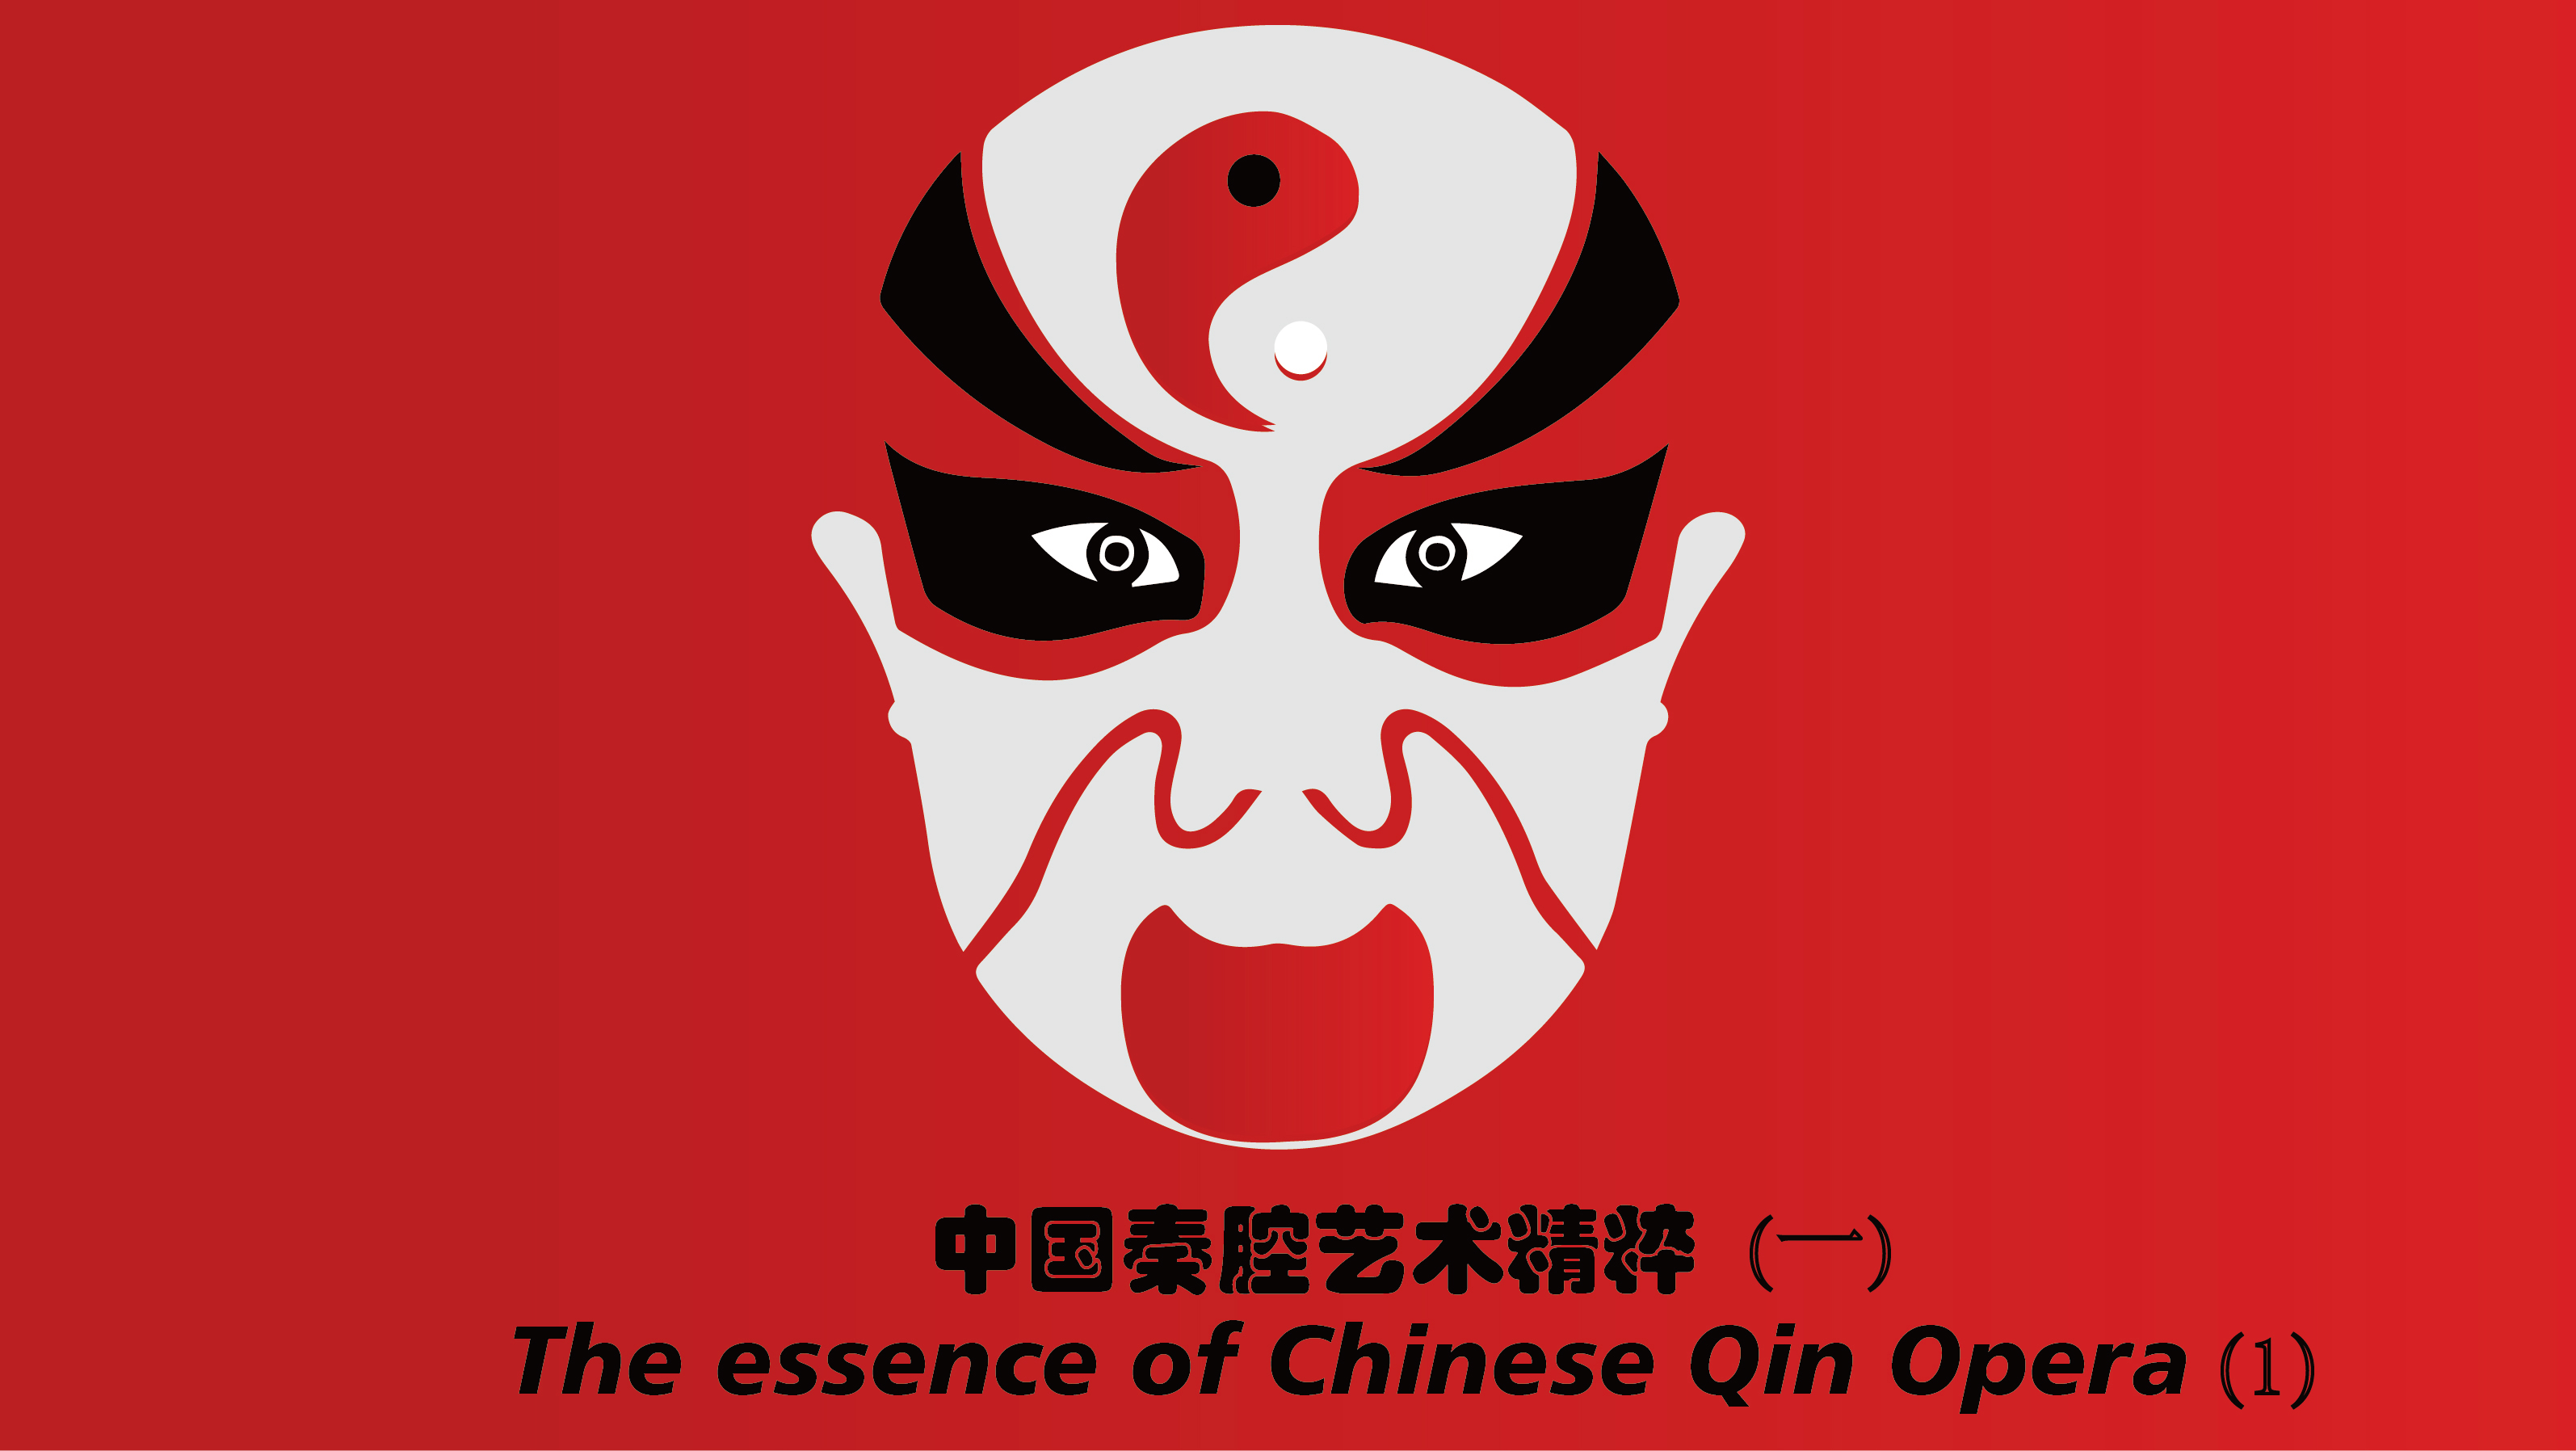 The essence of Chinese Qin Opera